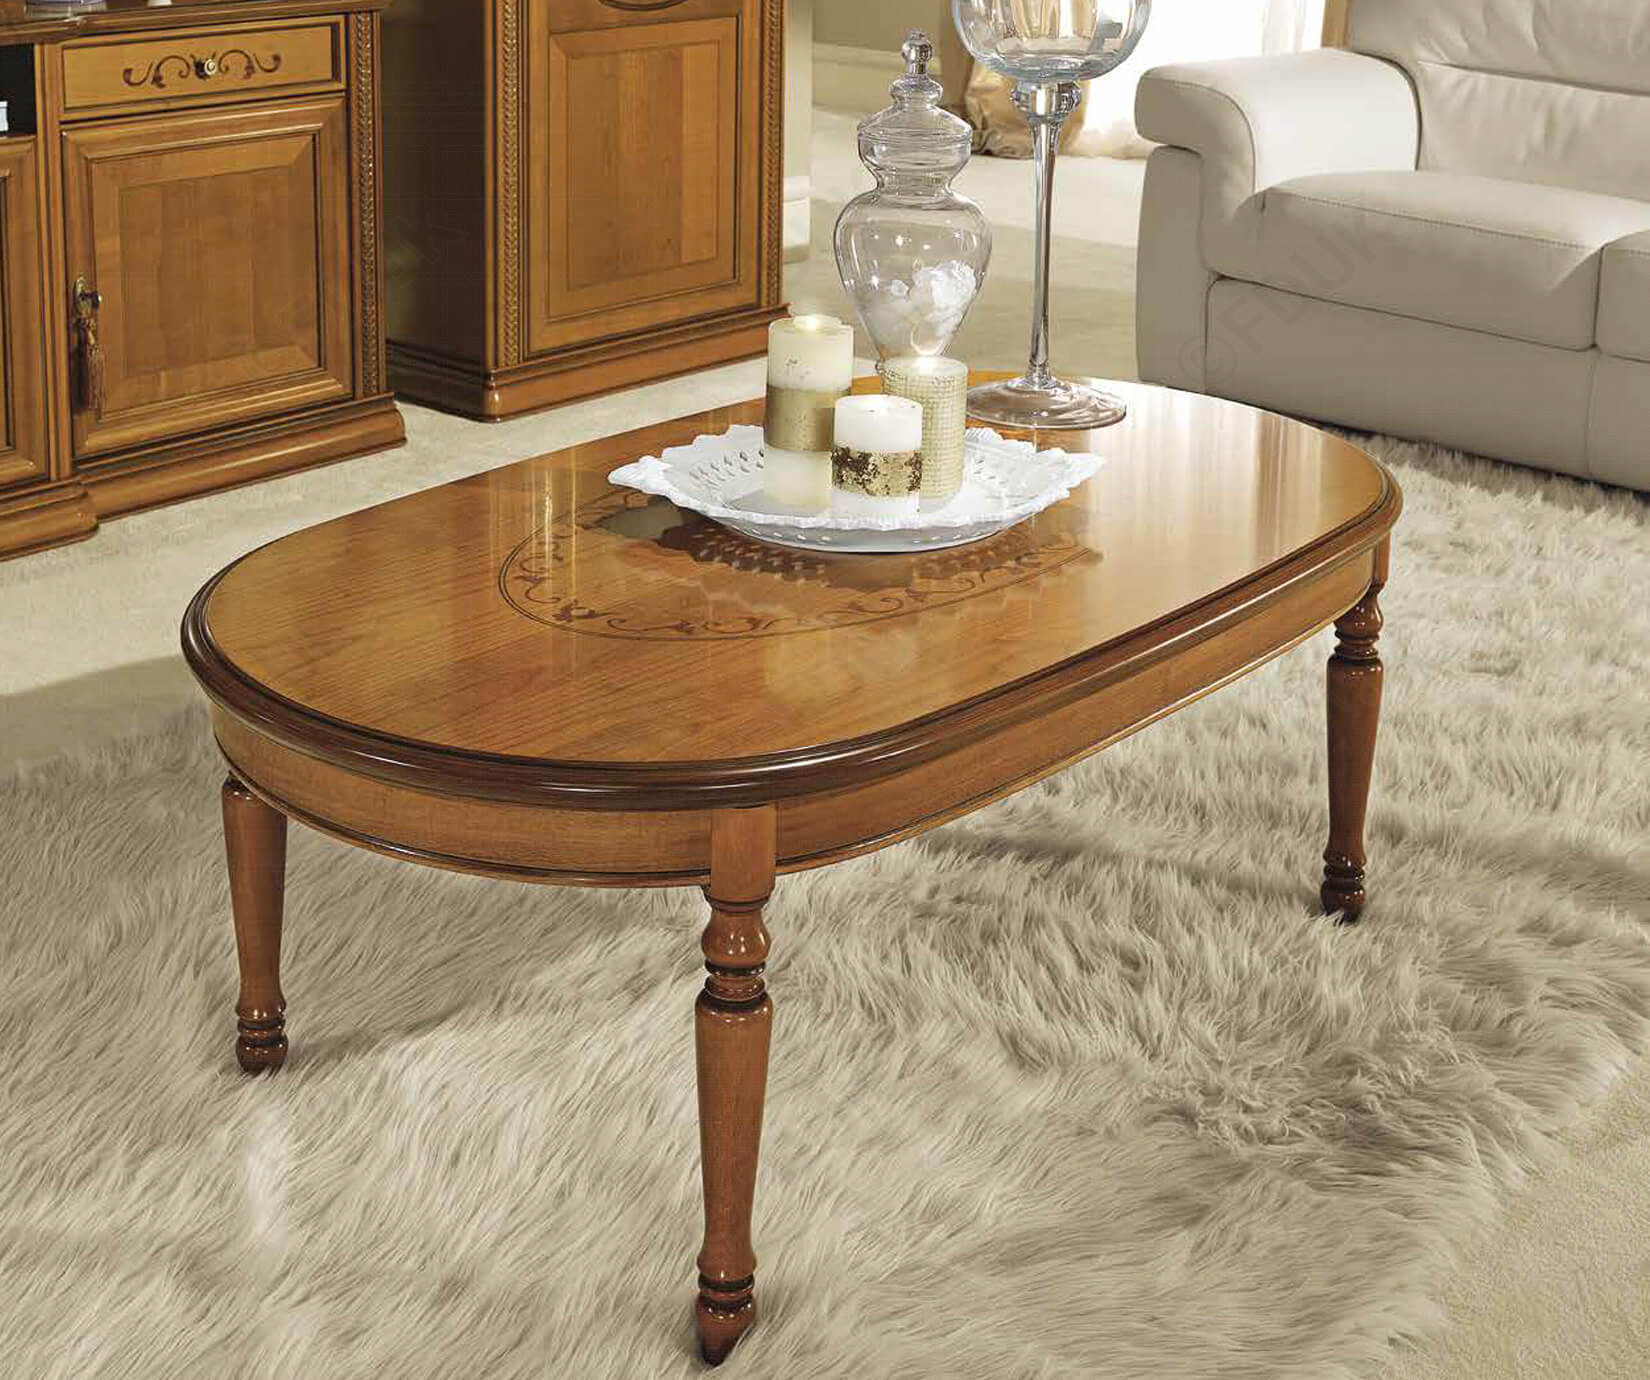 Camel Group Siena Siena Cherry Finish Coffee Table regarding proportions 1650 X 1380